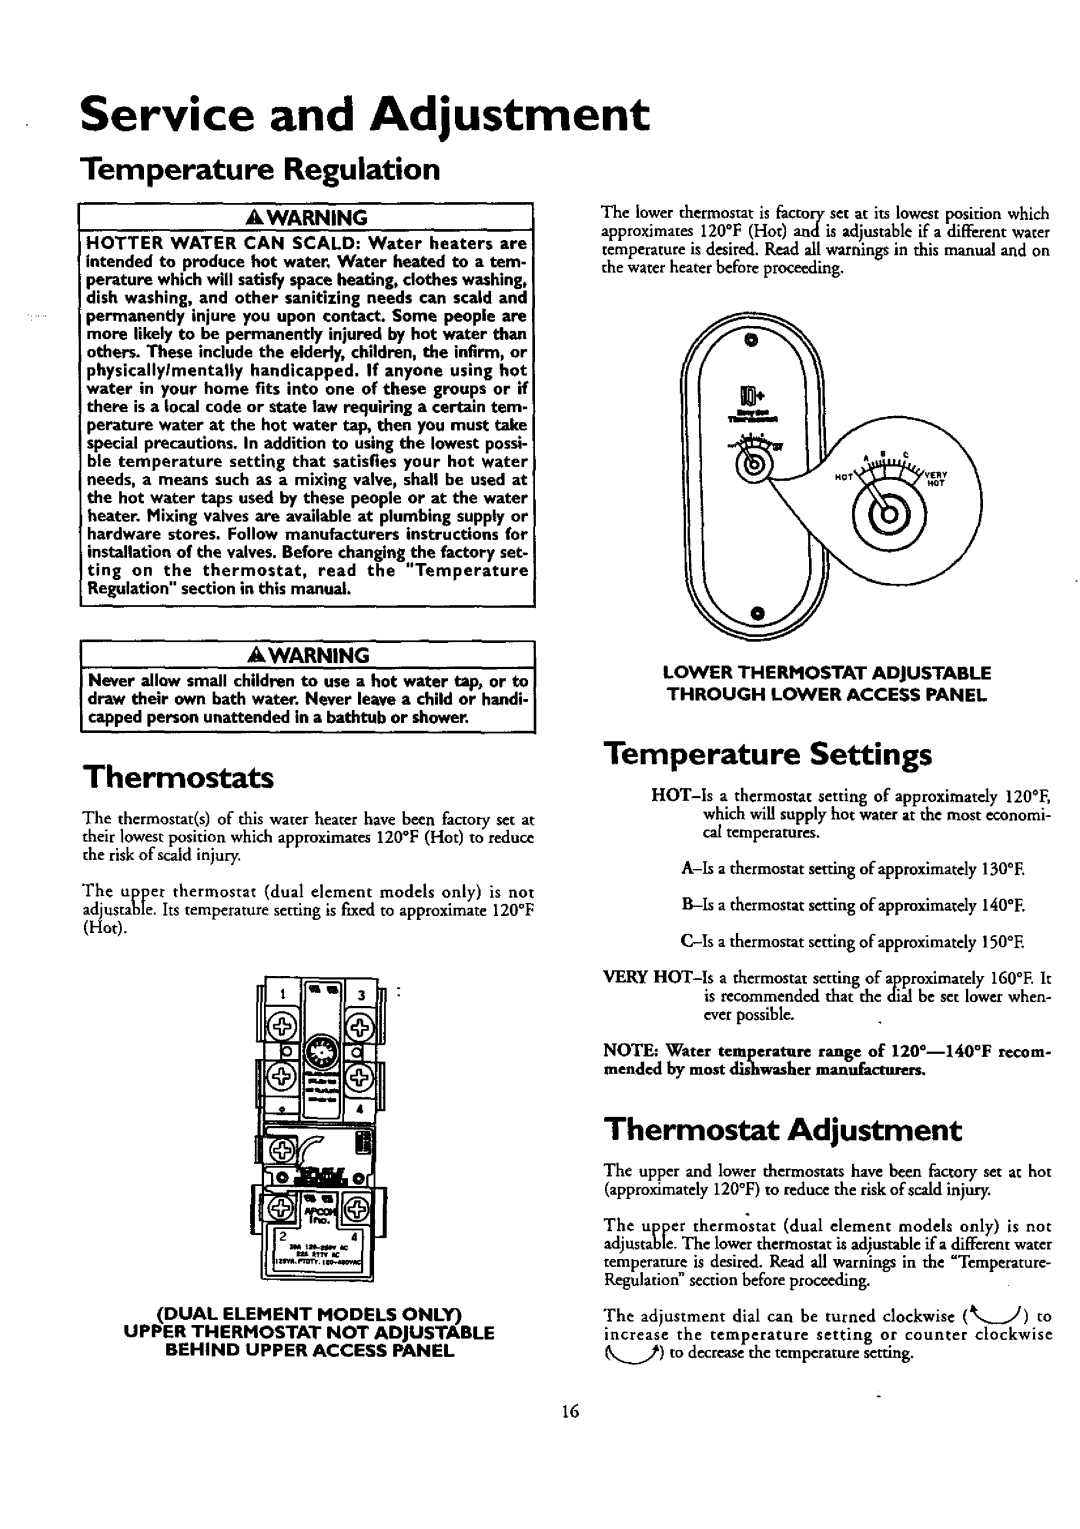 Kenmore 153.320390 HT 30 GAL Service and Adjustment, Thermostats, Temperature Settings, Thermostat Adjustment, Awarning 